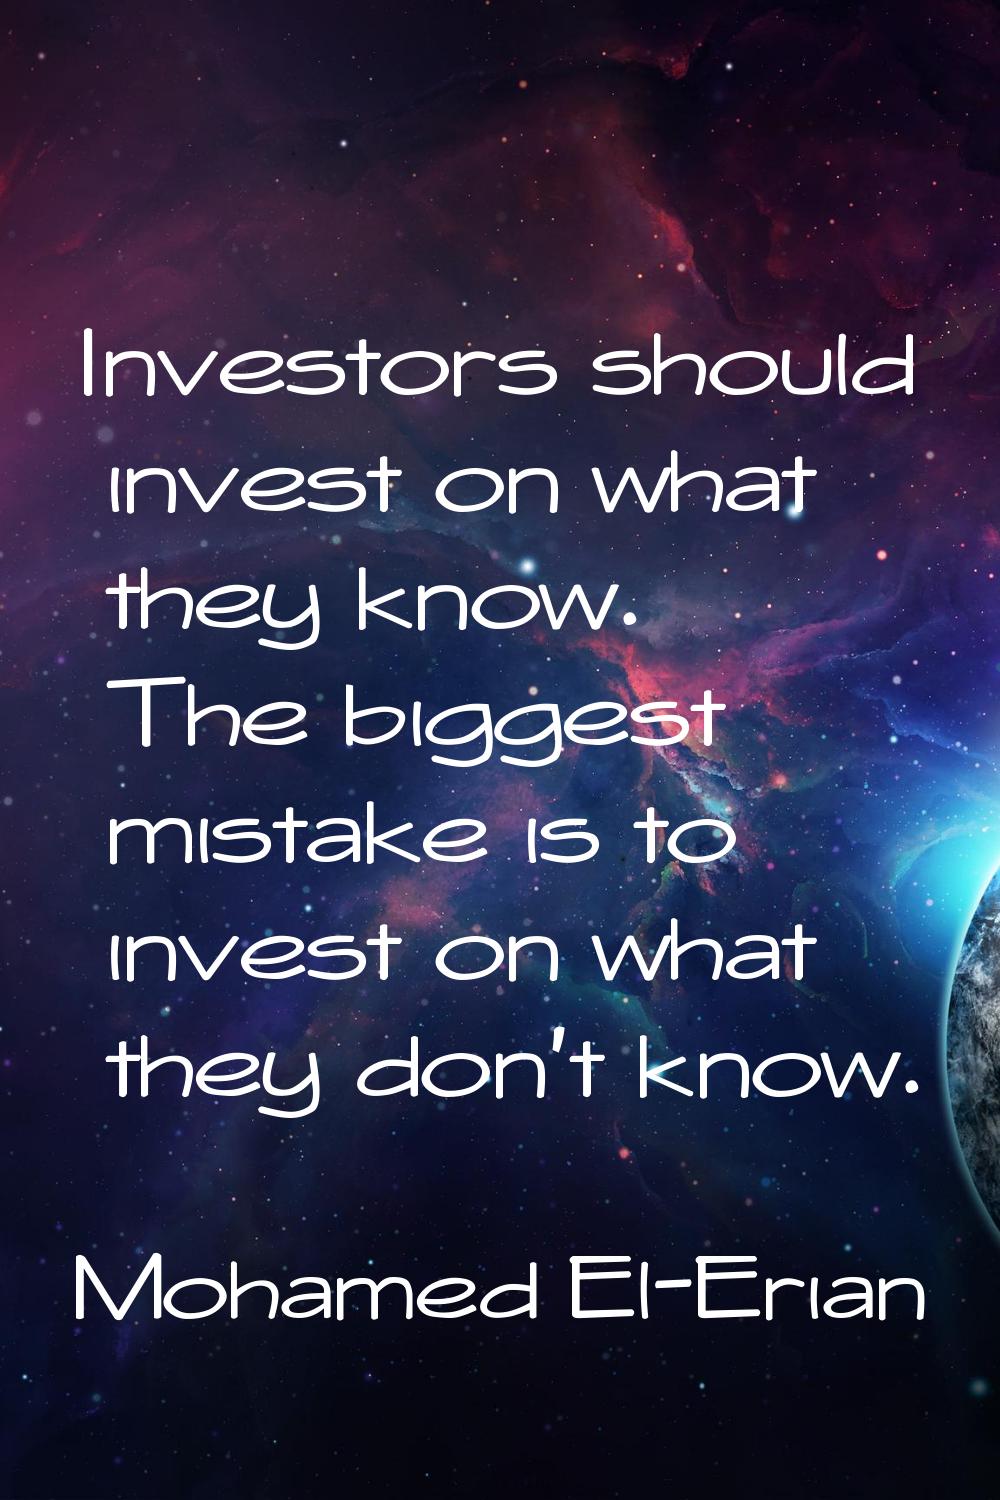 Investors should invest on what they know. The biggest mistake is to invest on what they don't know